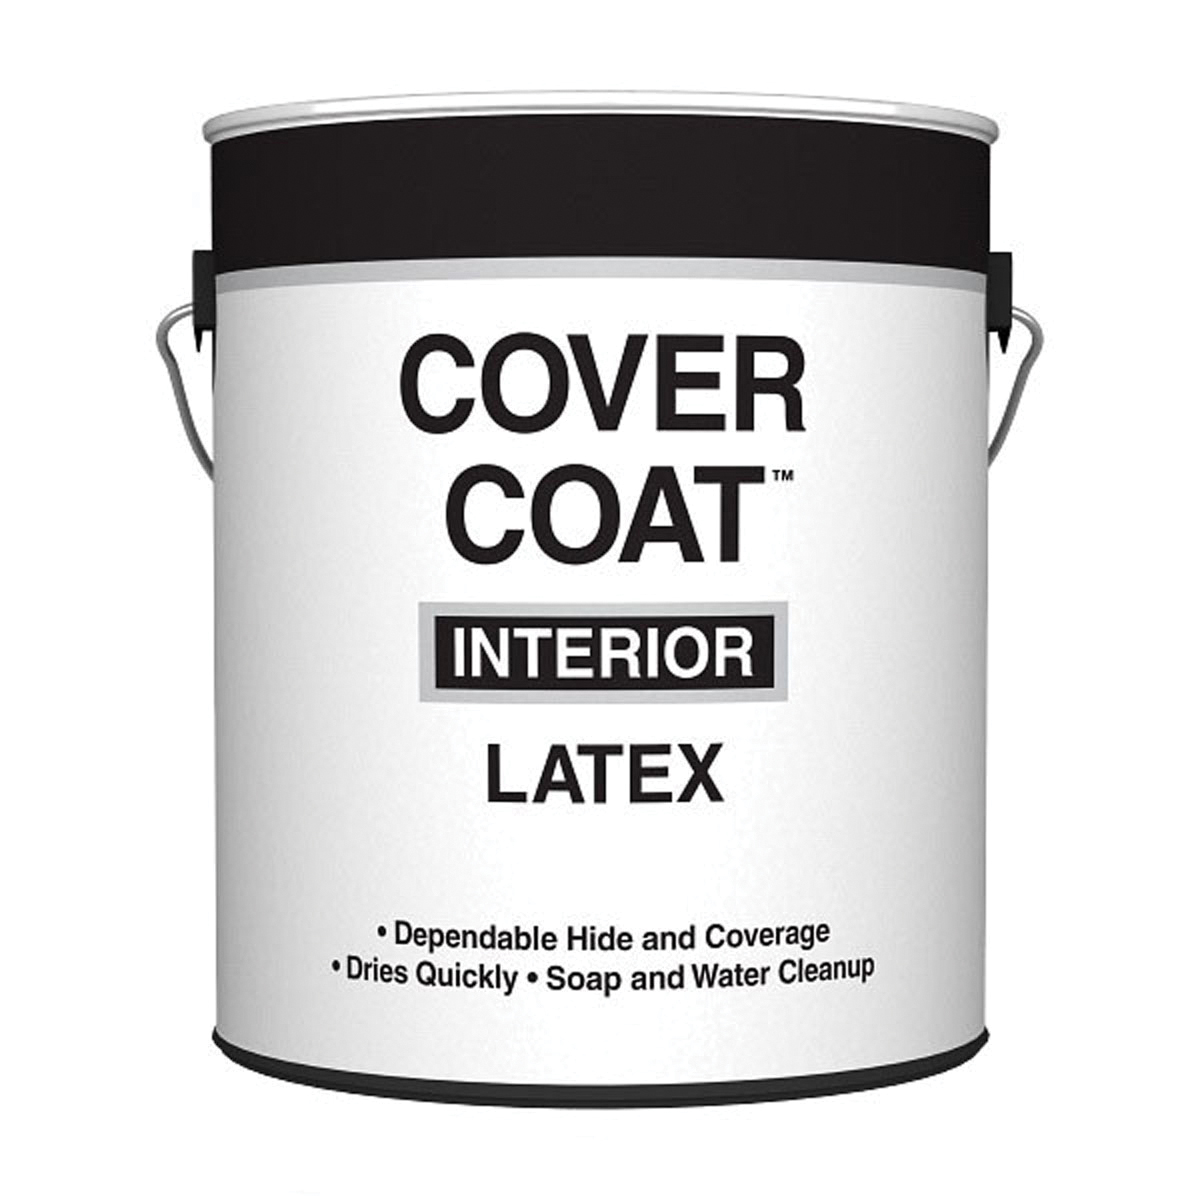 Cover Coat 044.0000257.008 Interior Paint, Flat, Dover White, 5 gal Pail